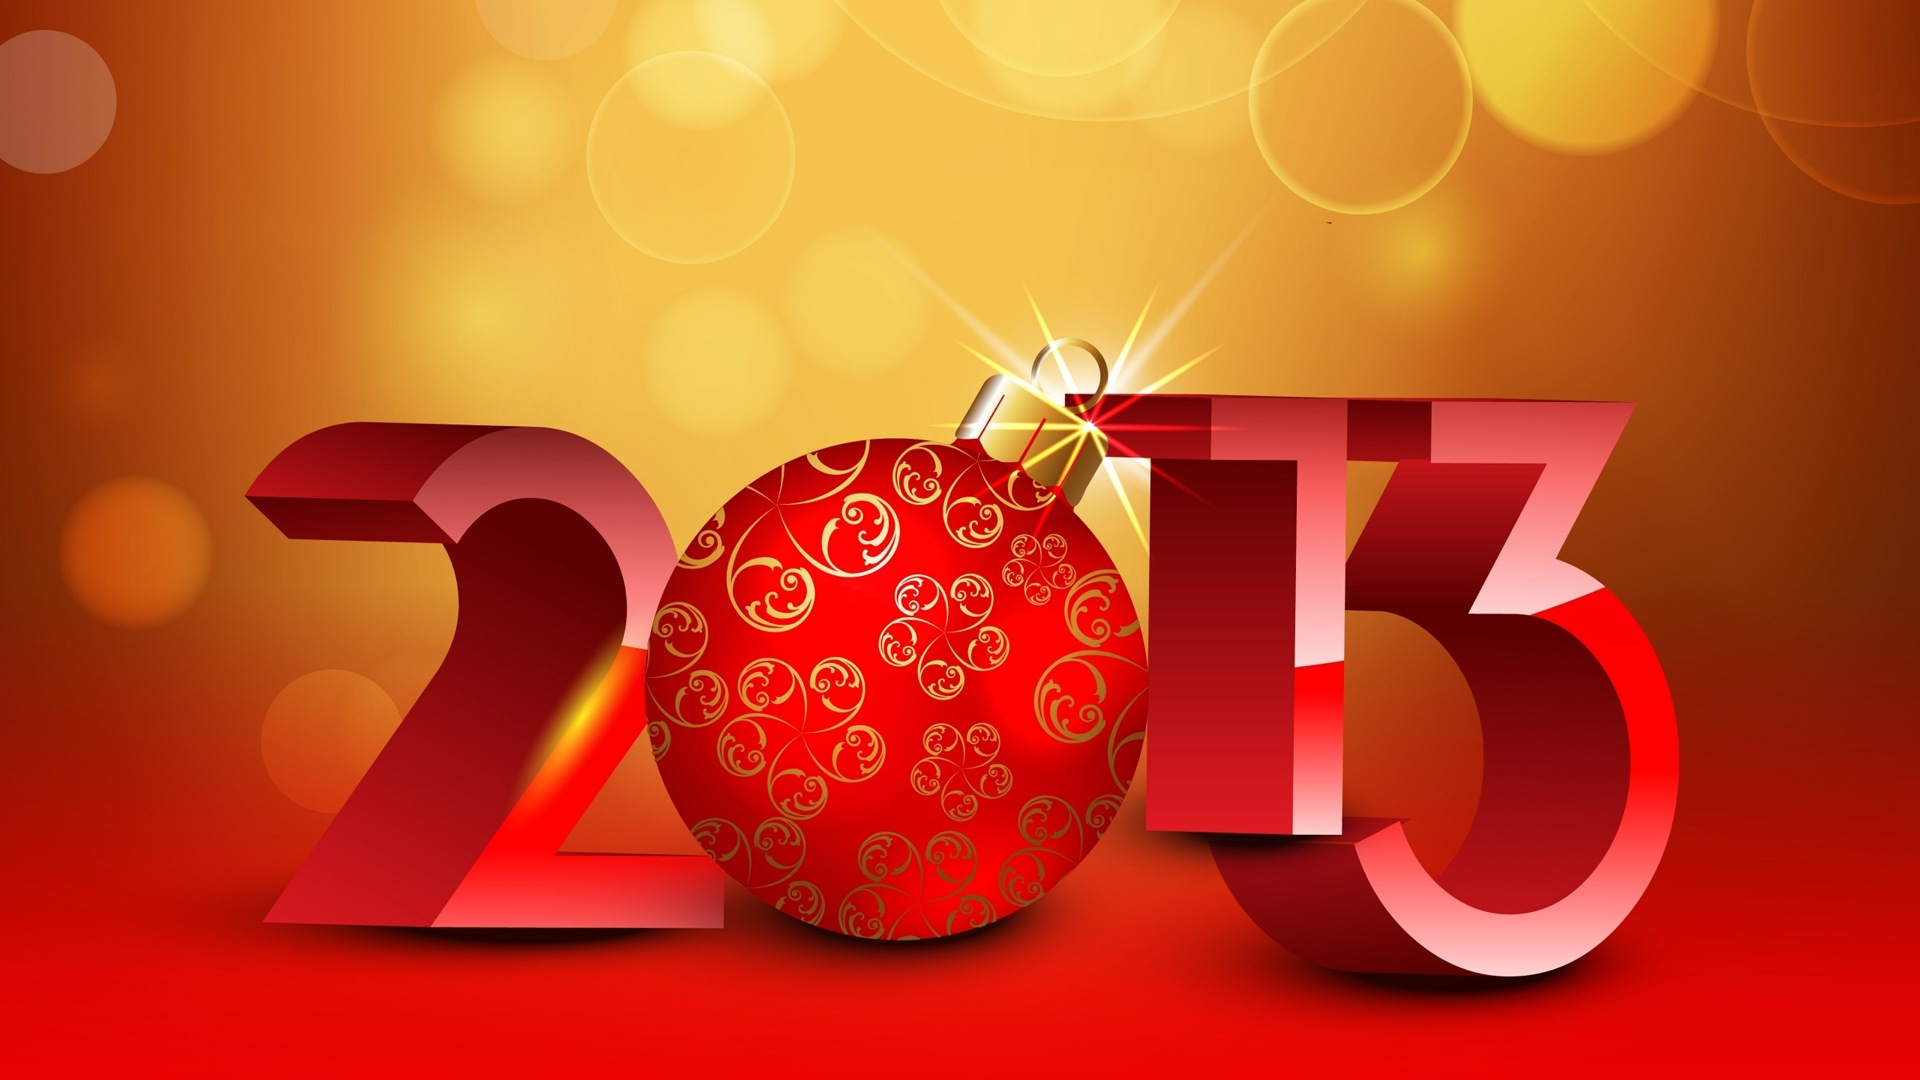 2013 Happy New Year HD wallpapers #16 - 1920x1080